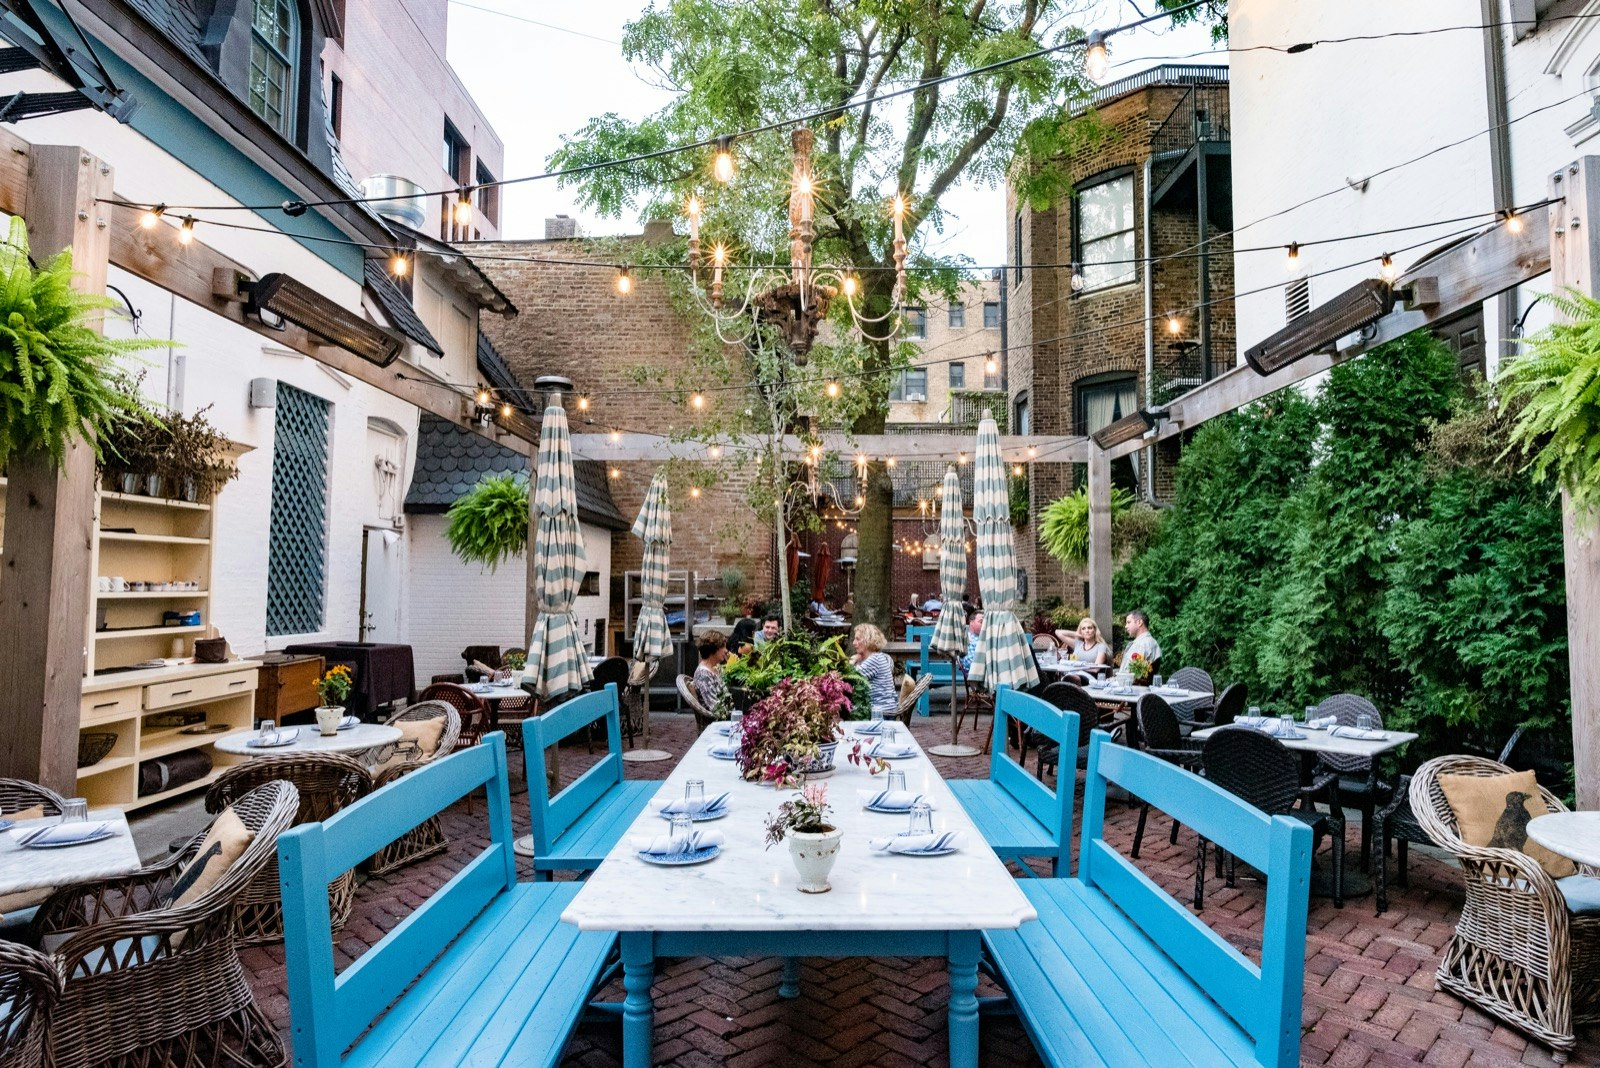 The charming patio strung with lights at the Blue Door Kitchen & Garden Patio